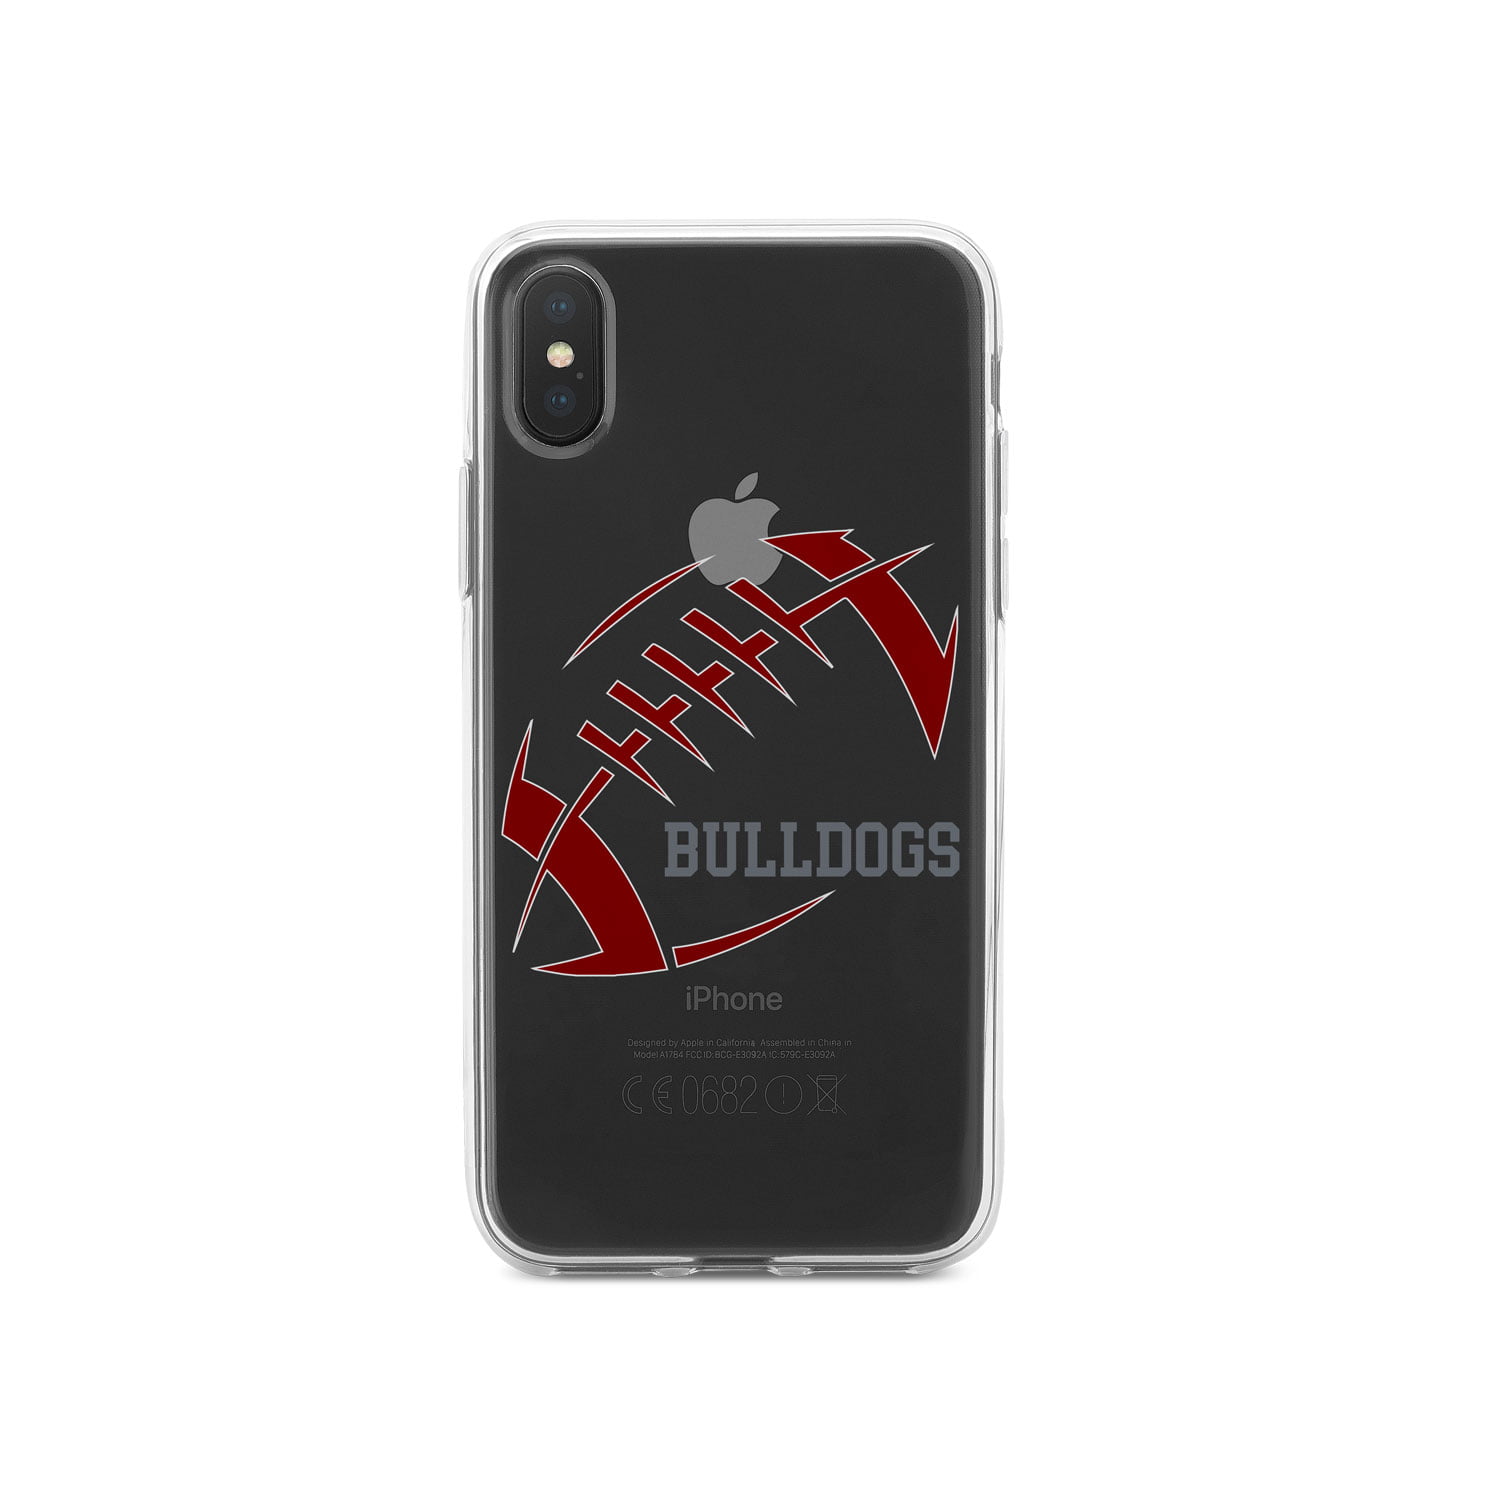 Crimson - TPU Bumper 5.8 Screen DistinctInk Clear Shockproof Hybrid Case for iPhone X/XS Acrylic Back Gray Alabama Football Tempered Glass Screen Protector 